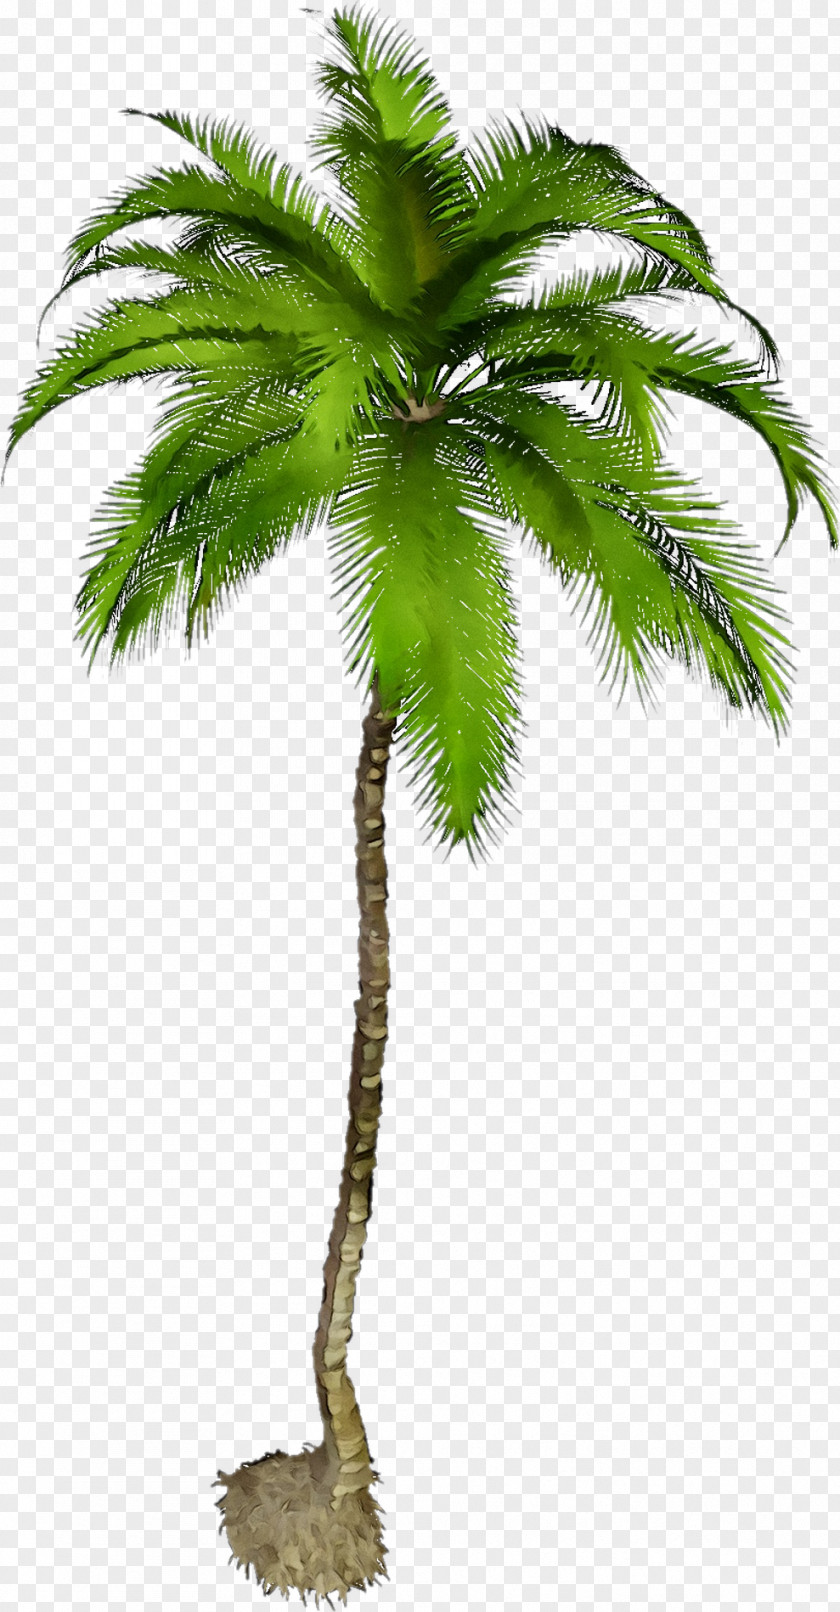 Clip Art Image Palm Trees Graphic Design PNG